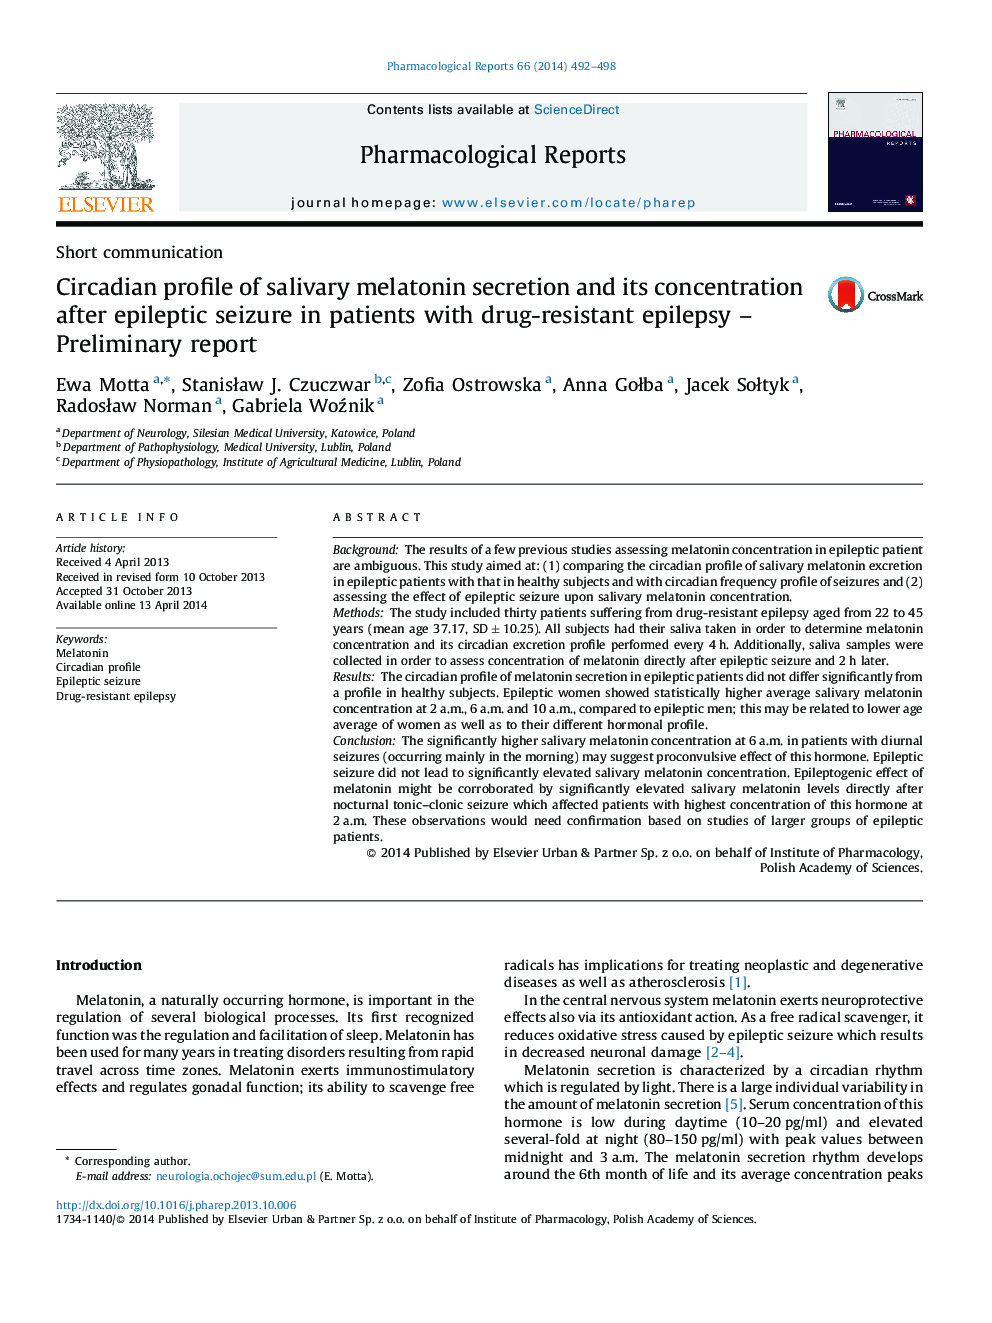 Circadian profile of salivary melatonin secretion and its concentration after epileptic seizure in patients with drug-resistant epilepsy – Preliminary report